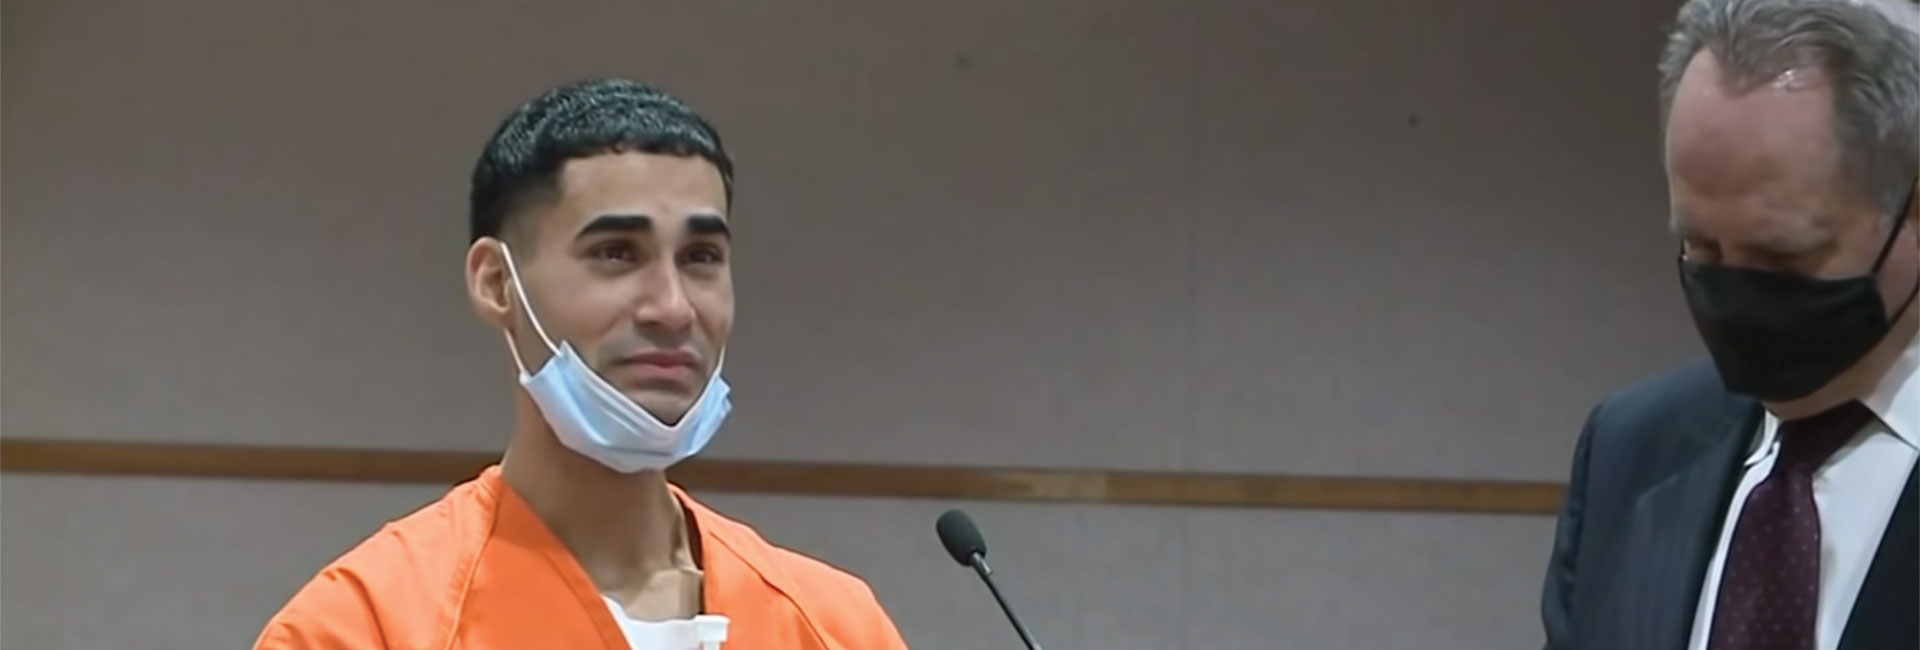 Rogel Aguilera-Mederos in a prison jumpsuit in court, crying.